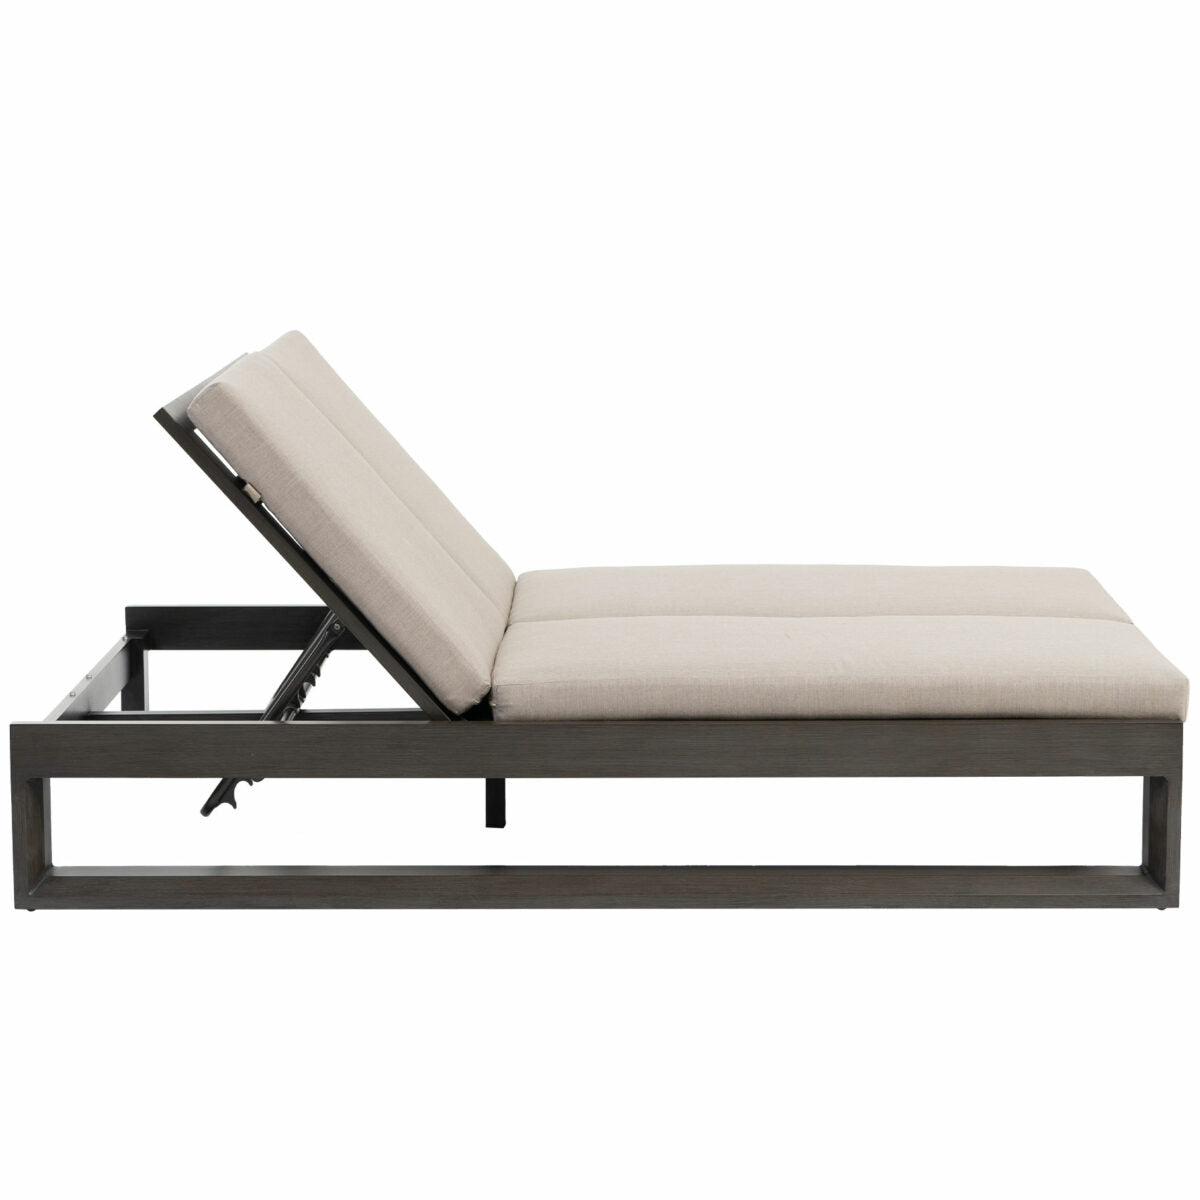 Element 5.0 Double Chaise Lounge